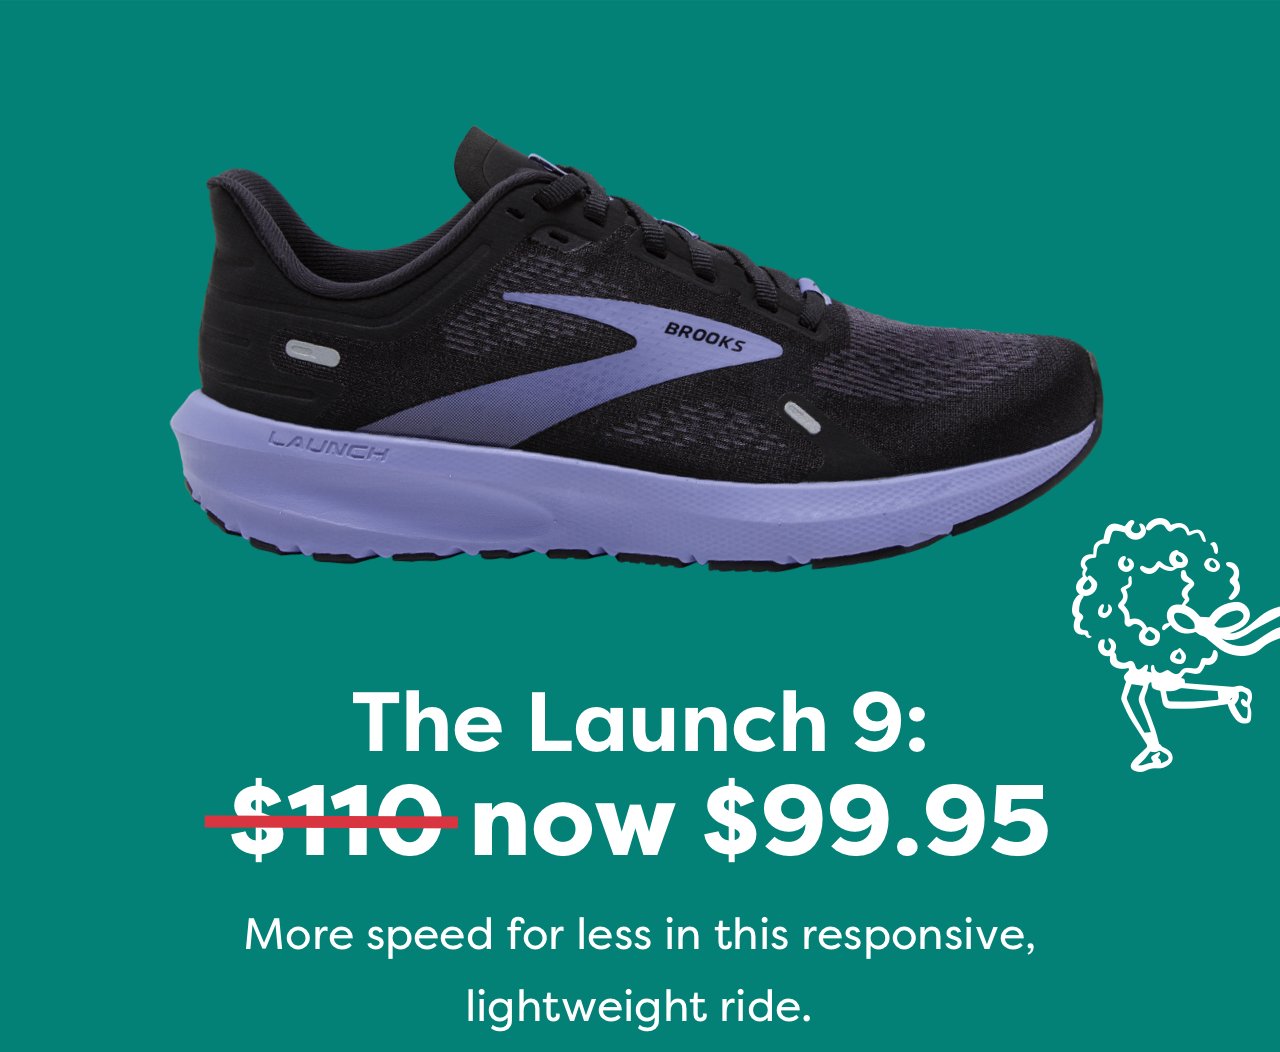 The Launch 9: $110 now $99.95 | More speed for less in this responsive, lightweight ride.